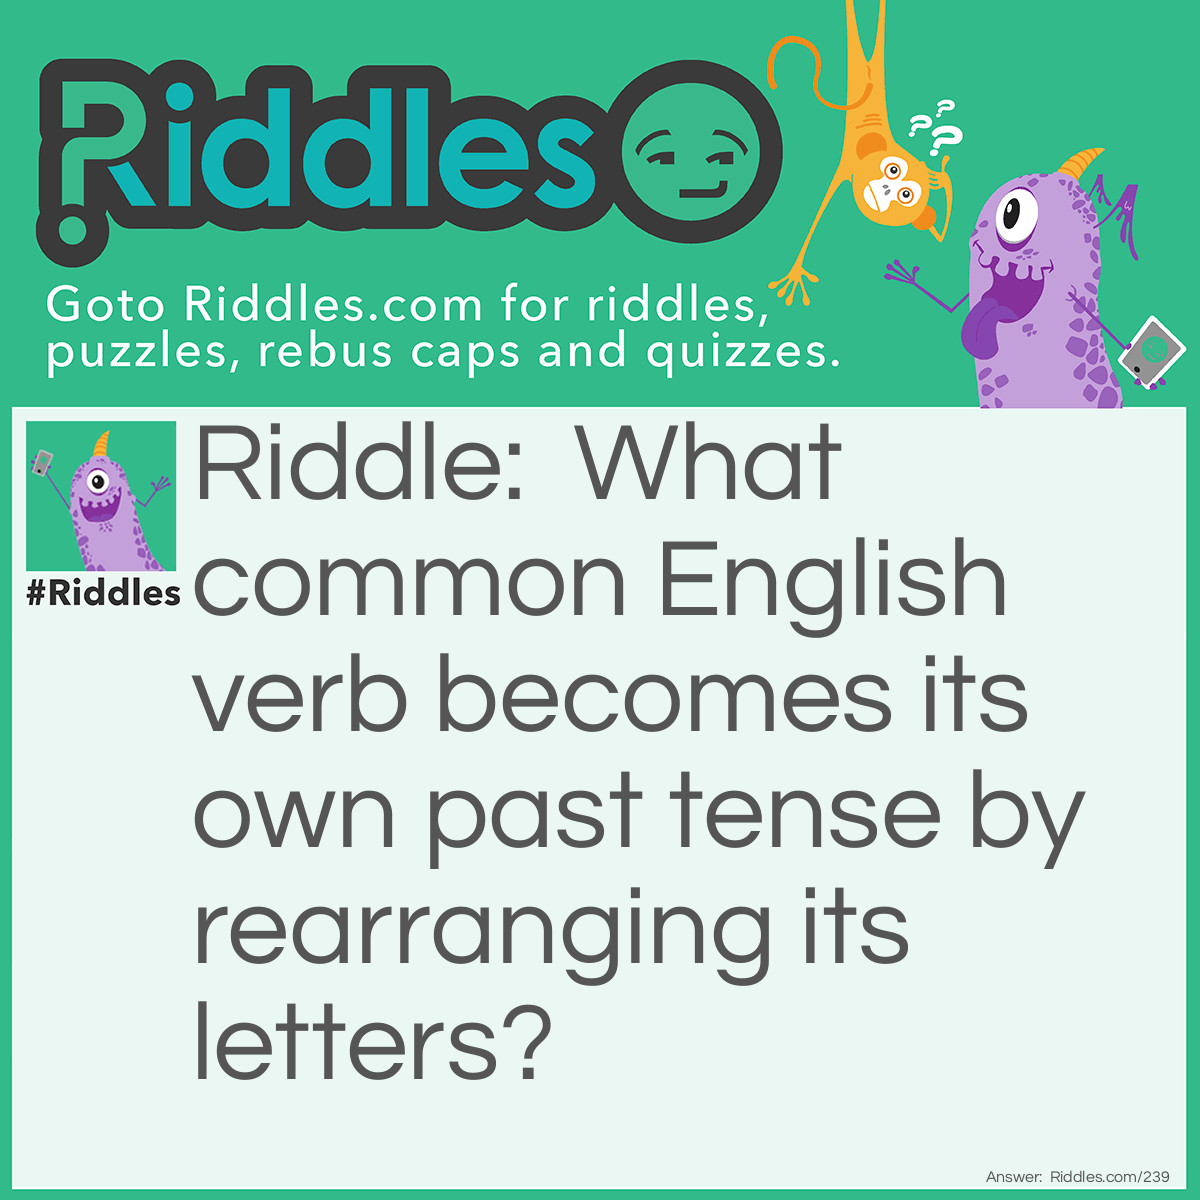 Riddle: What common English verb becomes its own past tense by rearranging its letters? Answer: Eat and Ate.